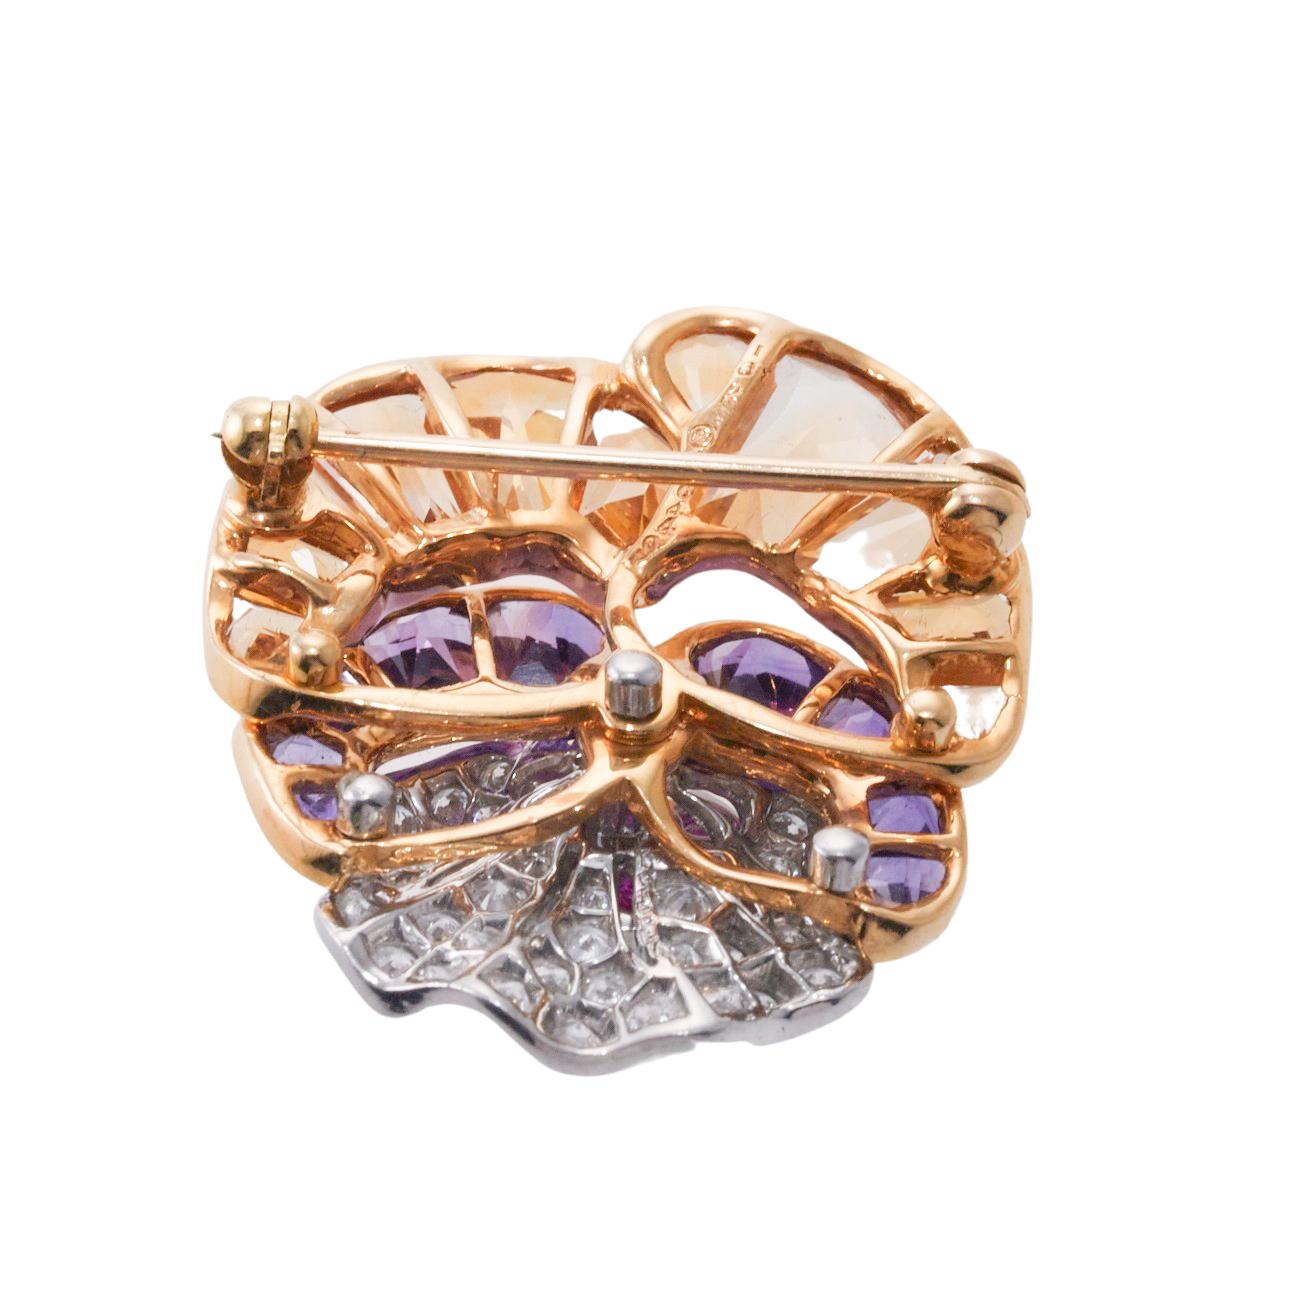 Oscar Heyman Iconic Pansy Diamond Amethyst Citrine Gold Platinum Brooch In Excellent Condition For Sale In New York, NY